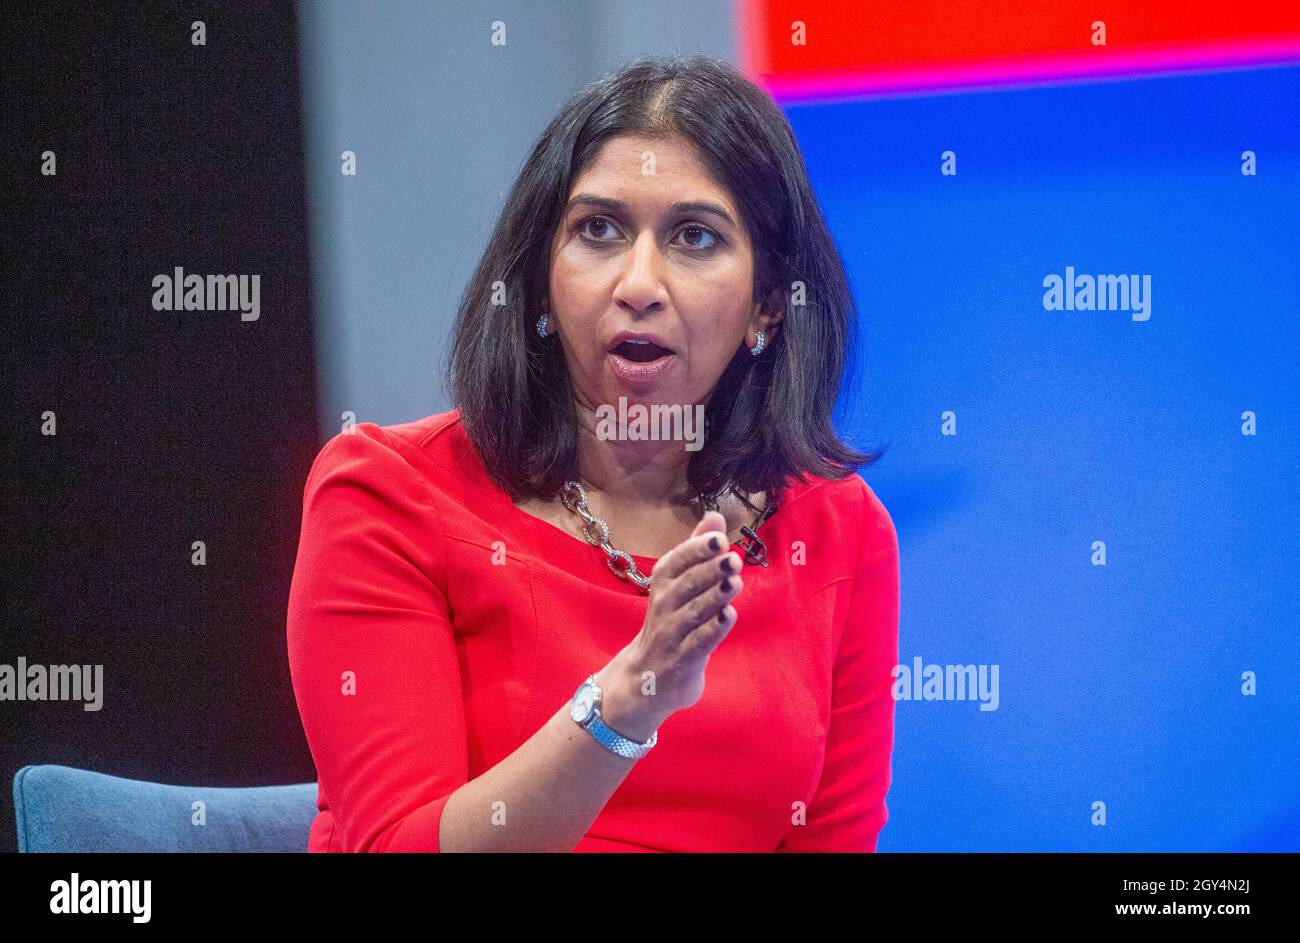 Suella Braverman, Attorney General for England and Wales and Advocate General for Northern Ireland, at the Conservative Party Conference. Stock Photo